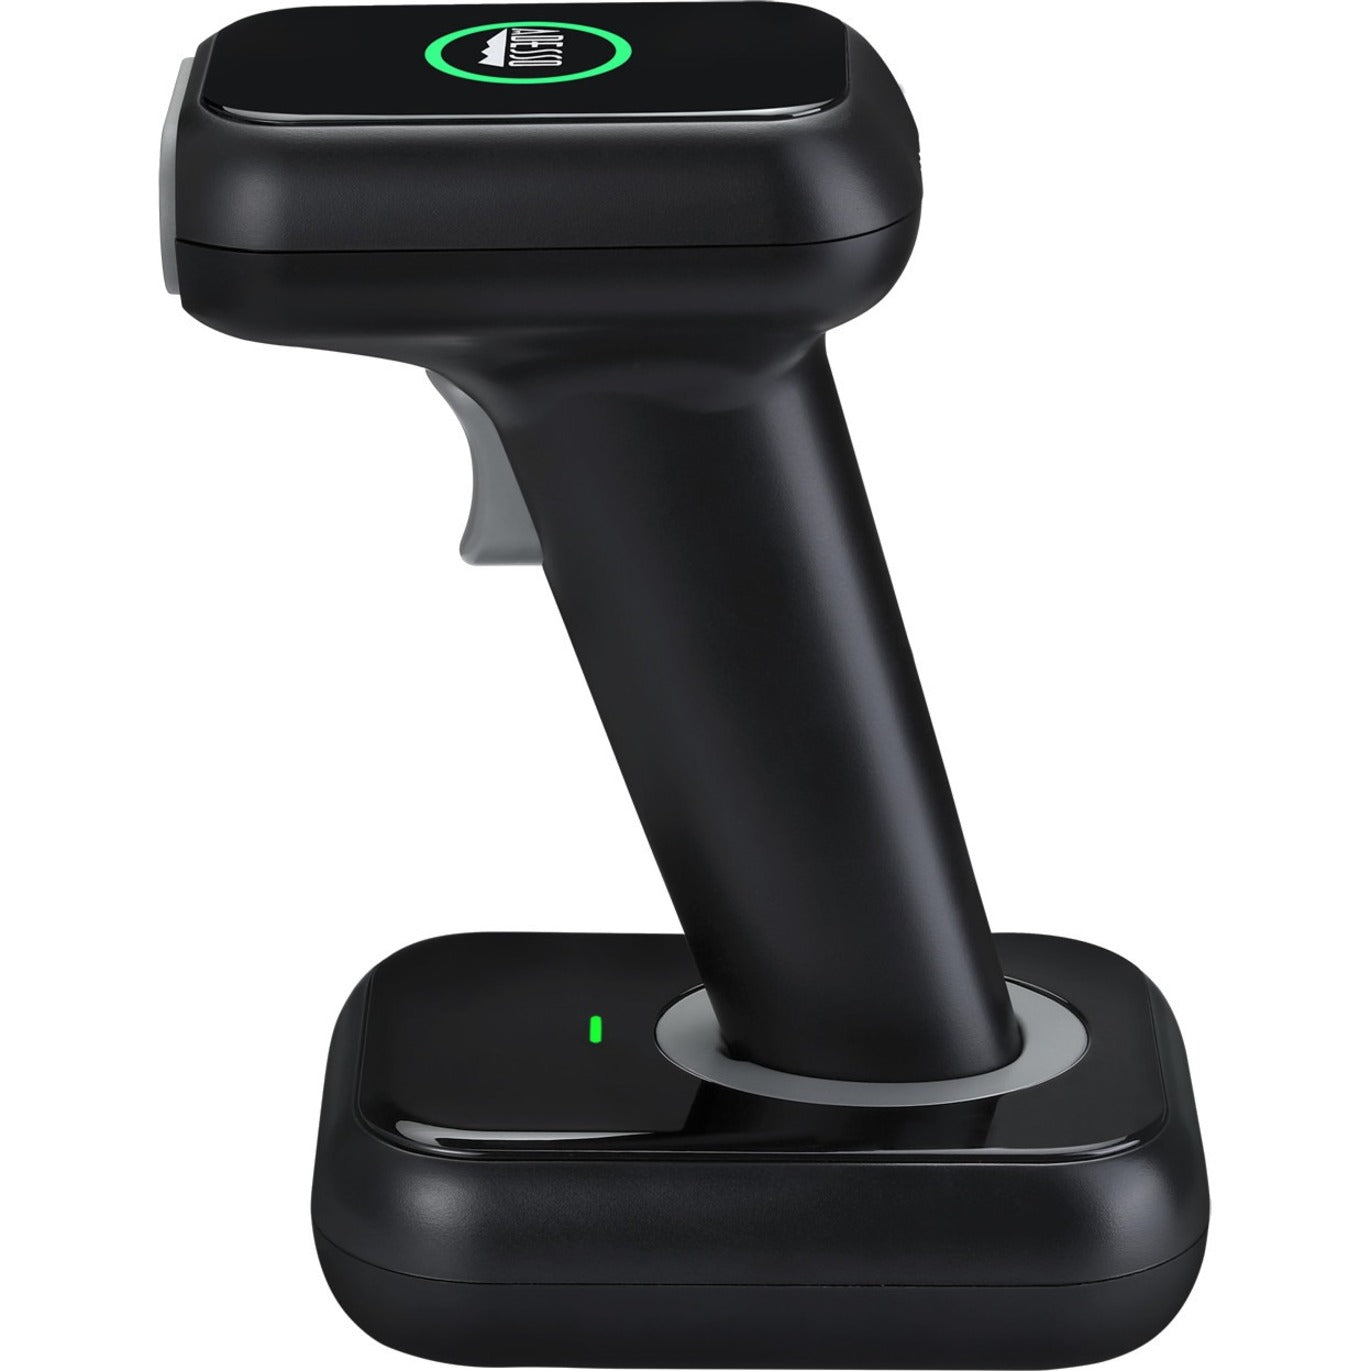 Adesso NUSCAN2700R NuScan 2700R 2D Wireless Barcode Scanner with Charging Cradle, Handheld, USB, Wireless, IP54